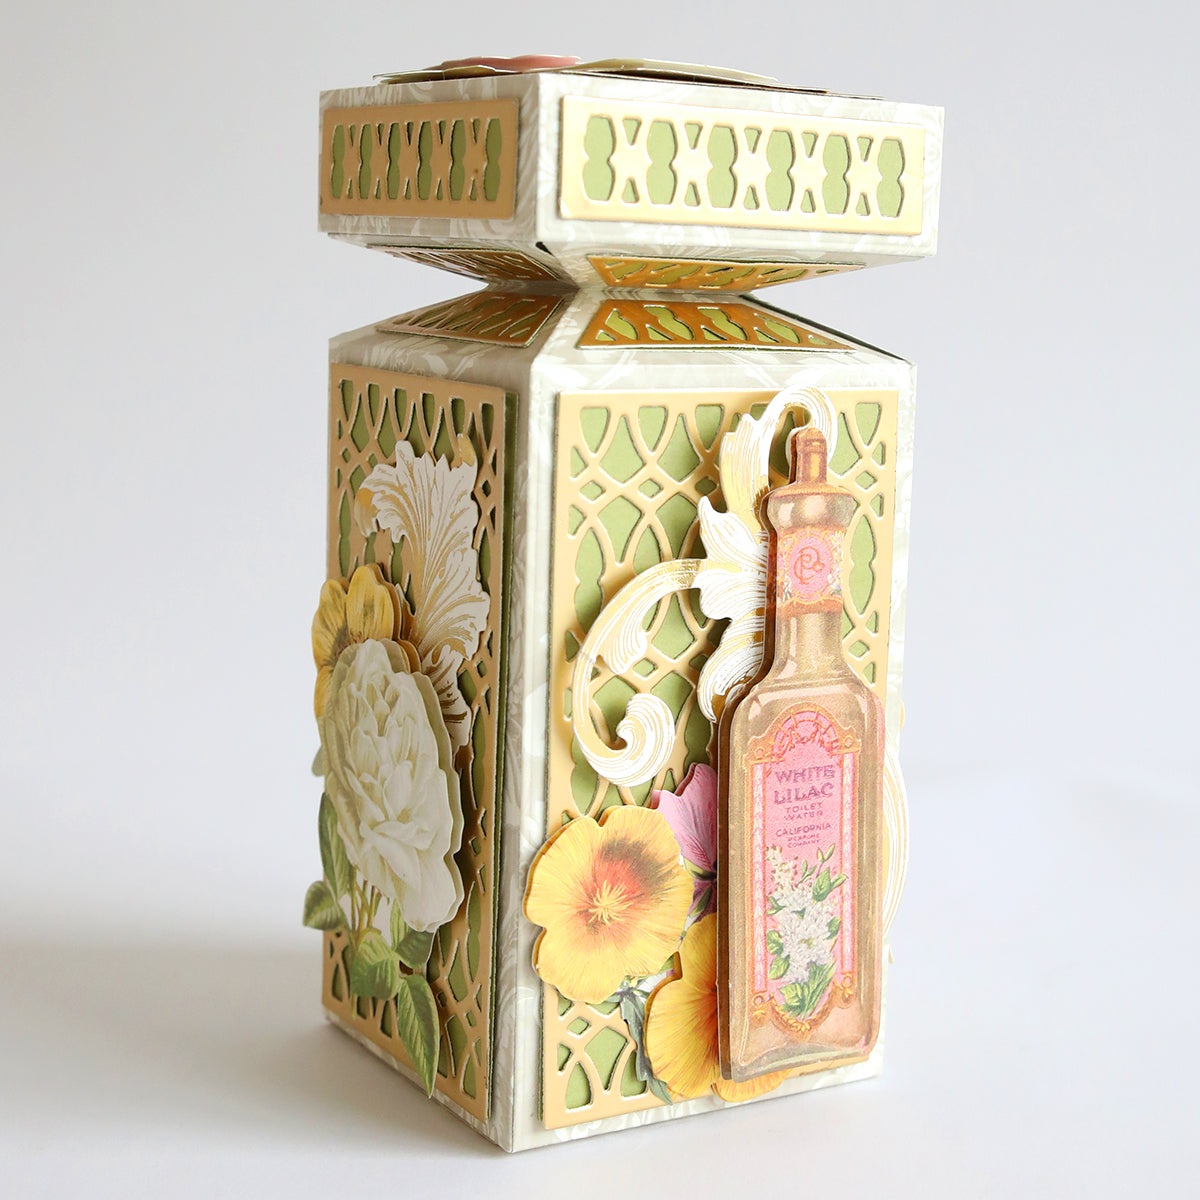 Perfume Box Dies, adorned with delicate flowers, perfect for cherished loved ones.